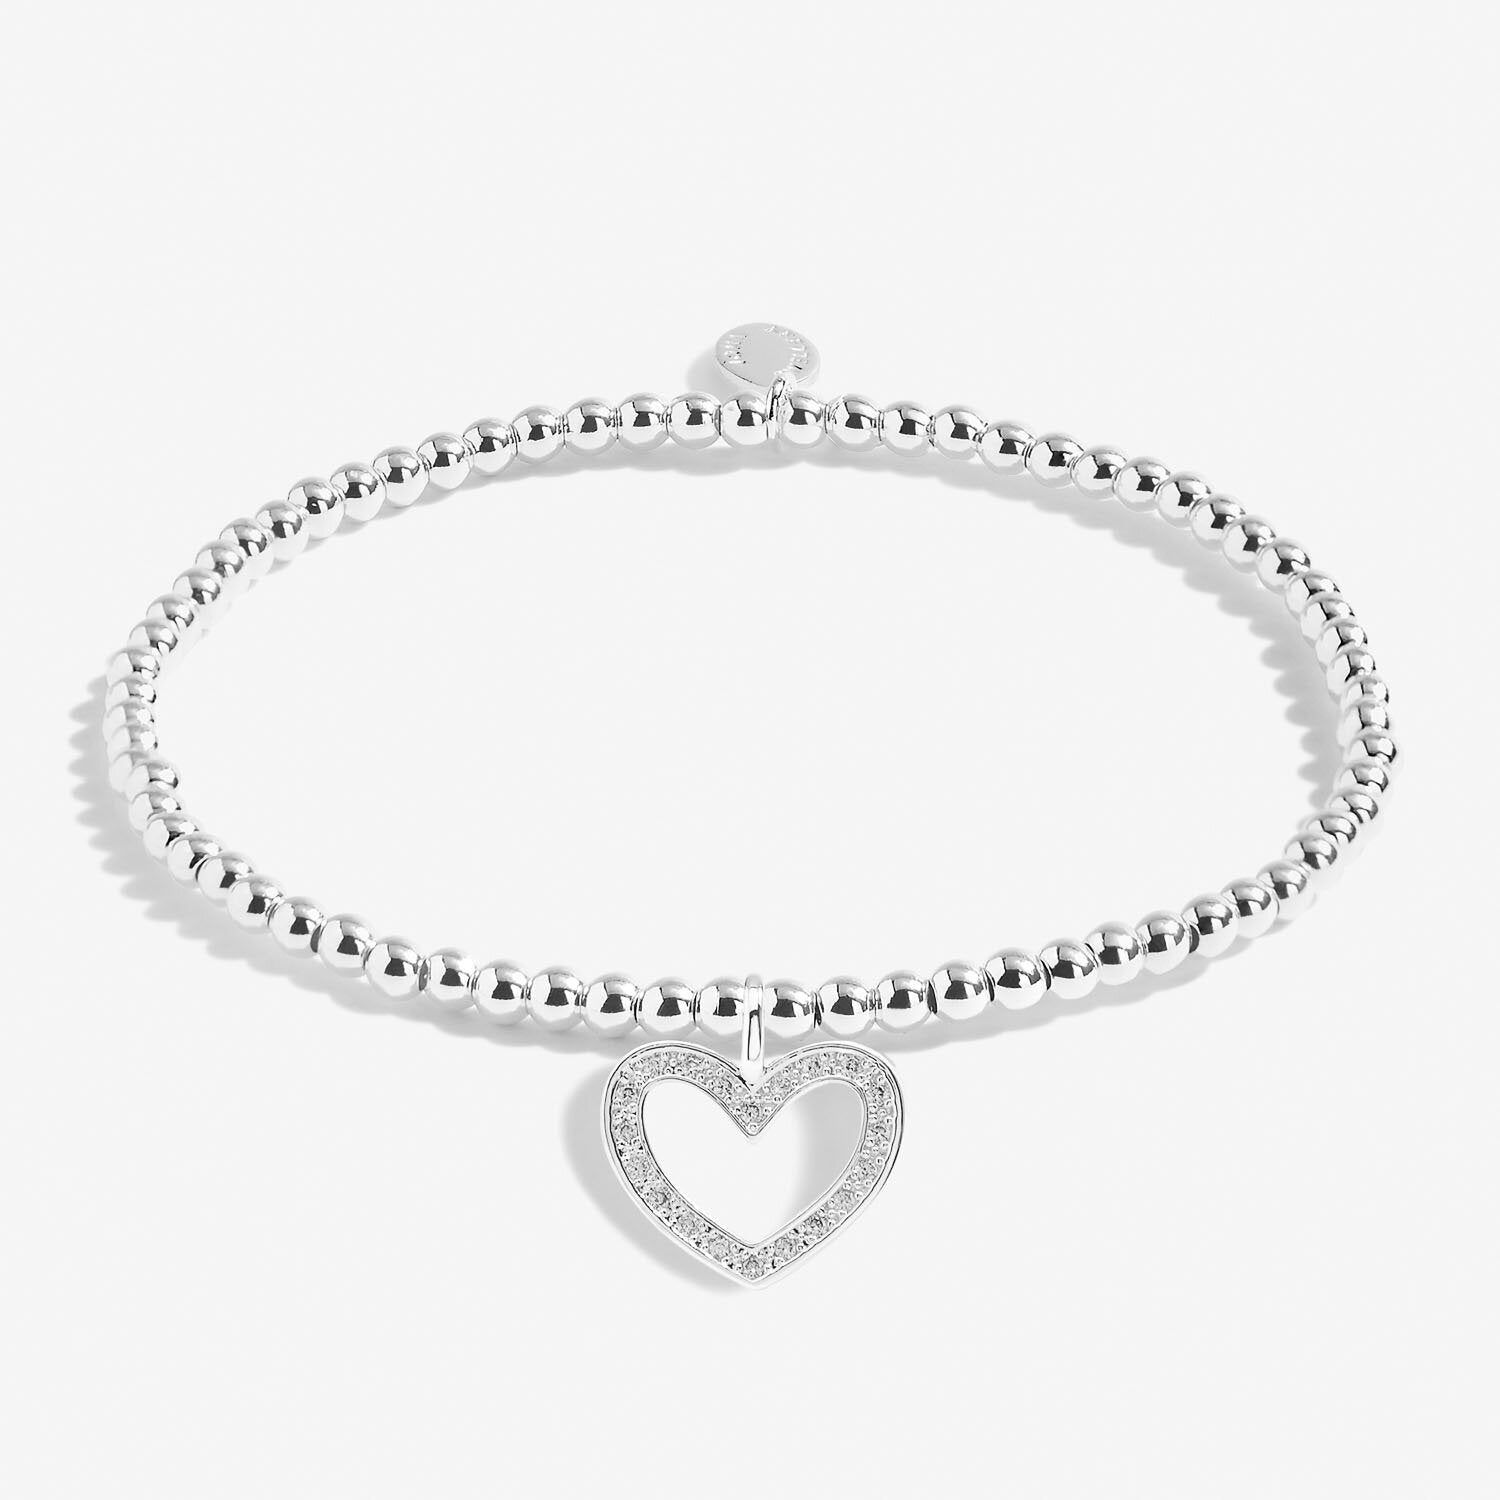 Bridal From The Heart Gift Box 'Bridesmaid' Bracelet